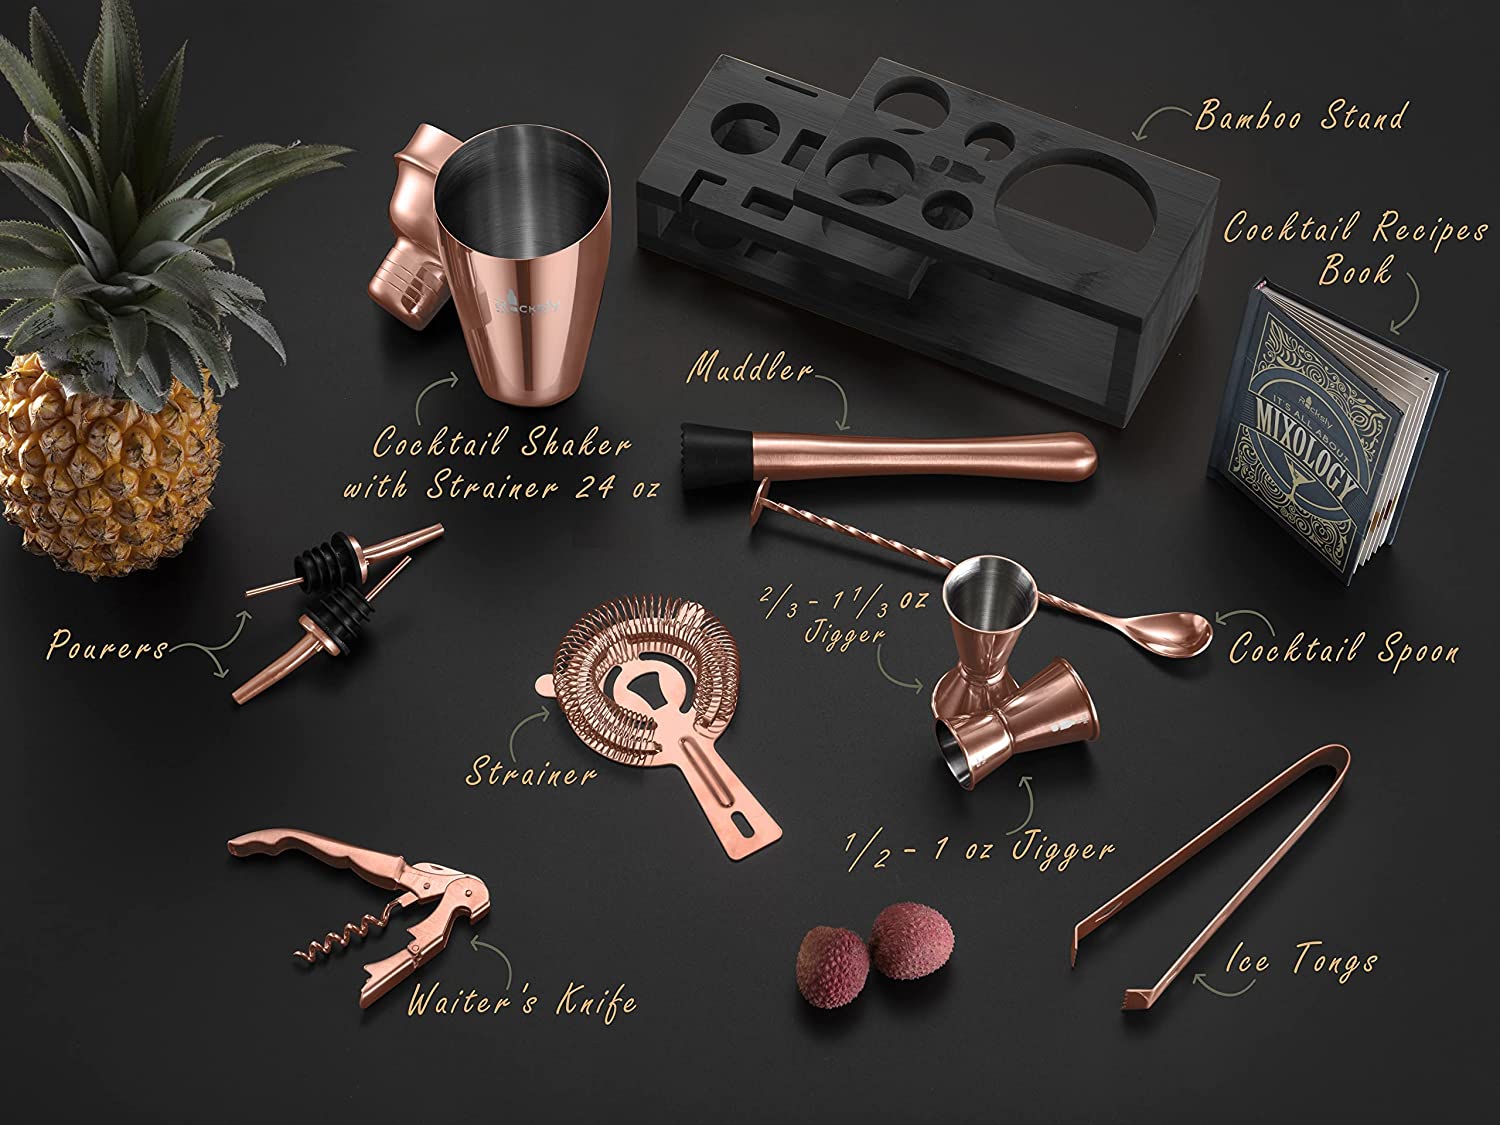 Copper Finish Professional two-piece Cocktail Shaker set with Hawthorne Strainer and Japanese Jigger Copper Boston Shaker Set